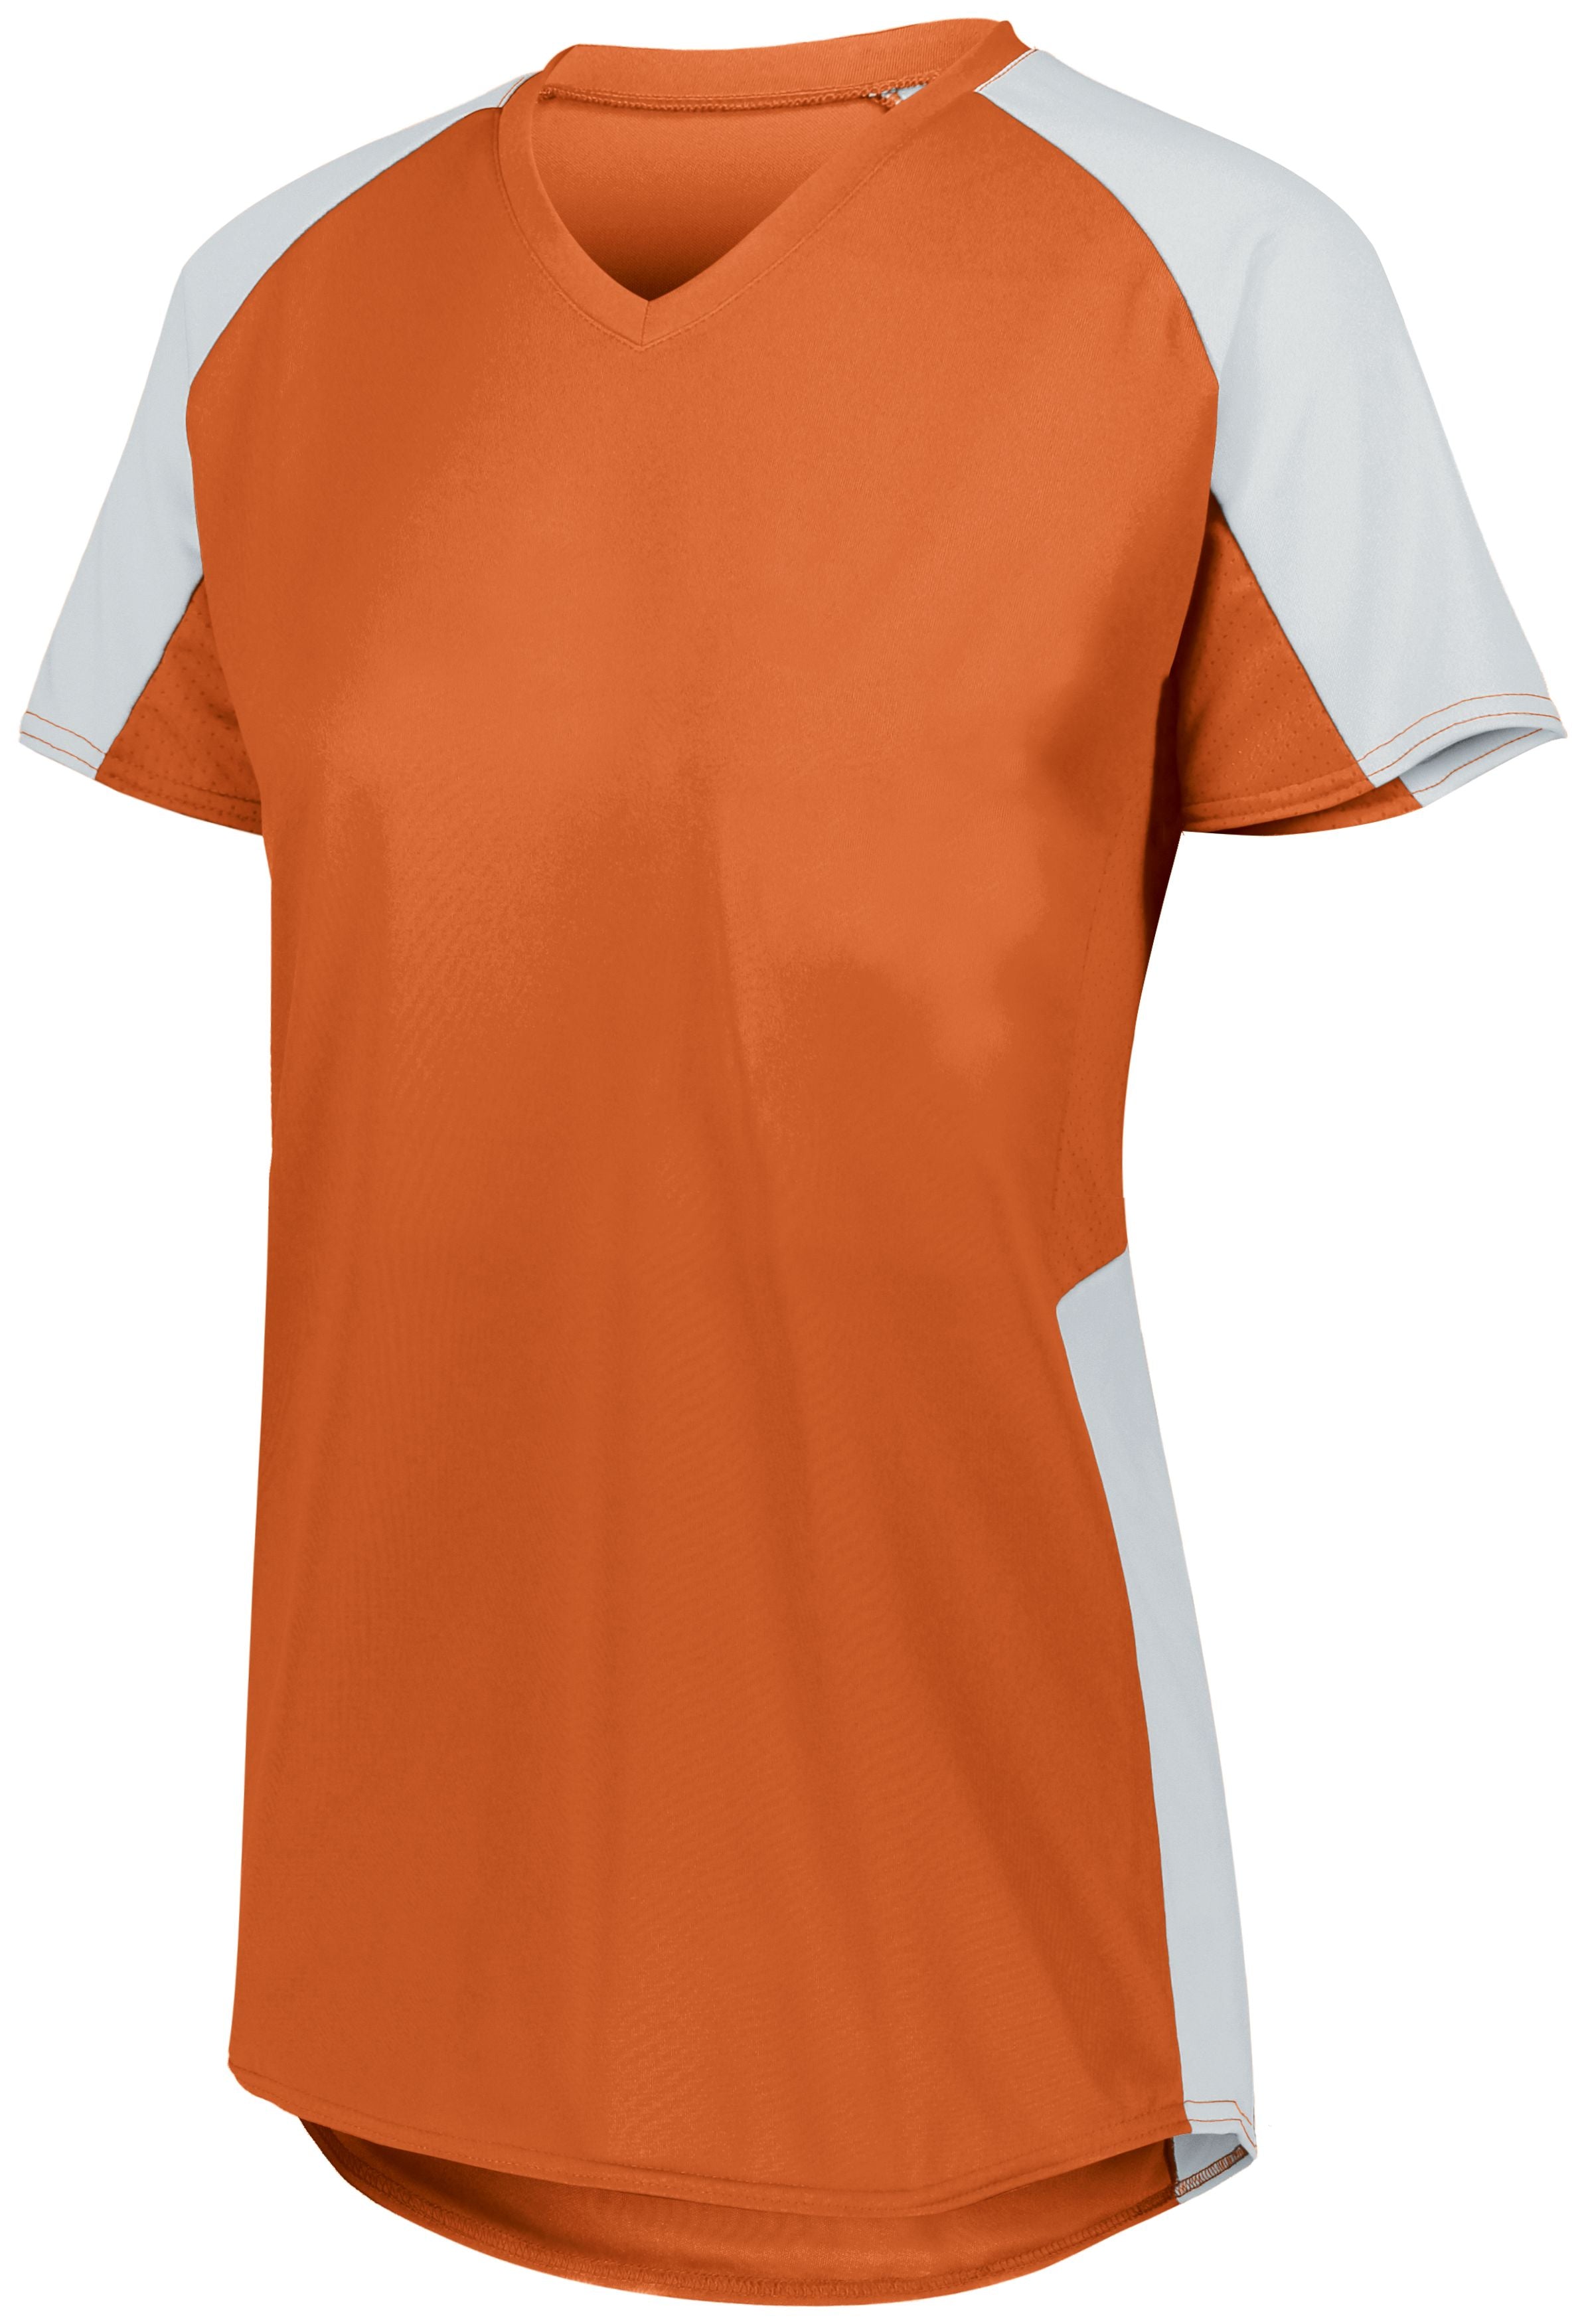 Augusta Sportswear Ladies Cutter Jersey in Orange/White  -Part of the Ladies, Ladies-Jersey, Augusta-Products, Softball, Shirts product lines at KanaleyCreations.com